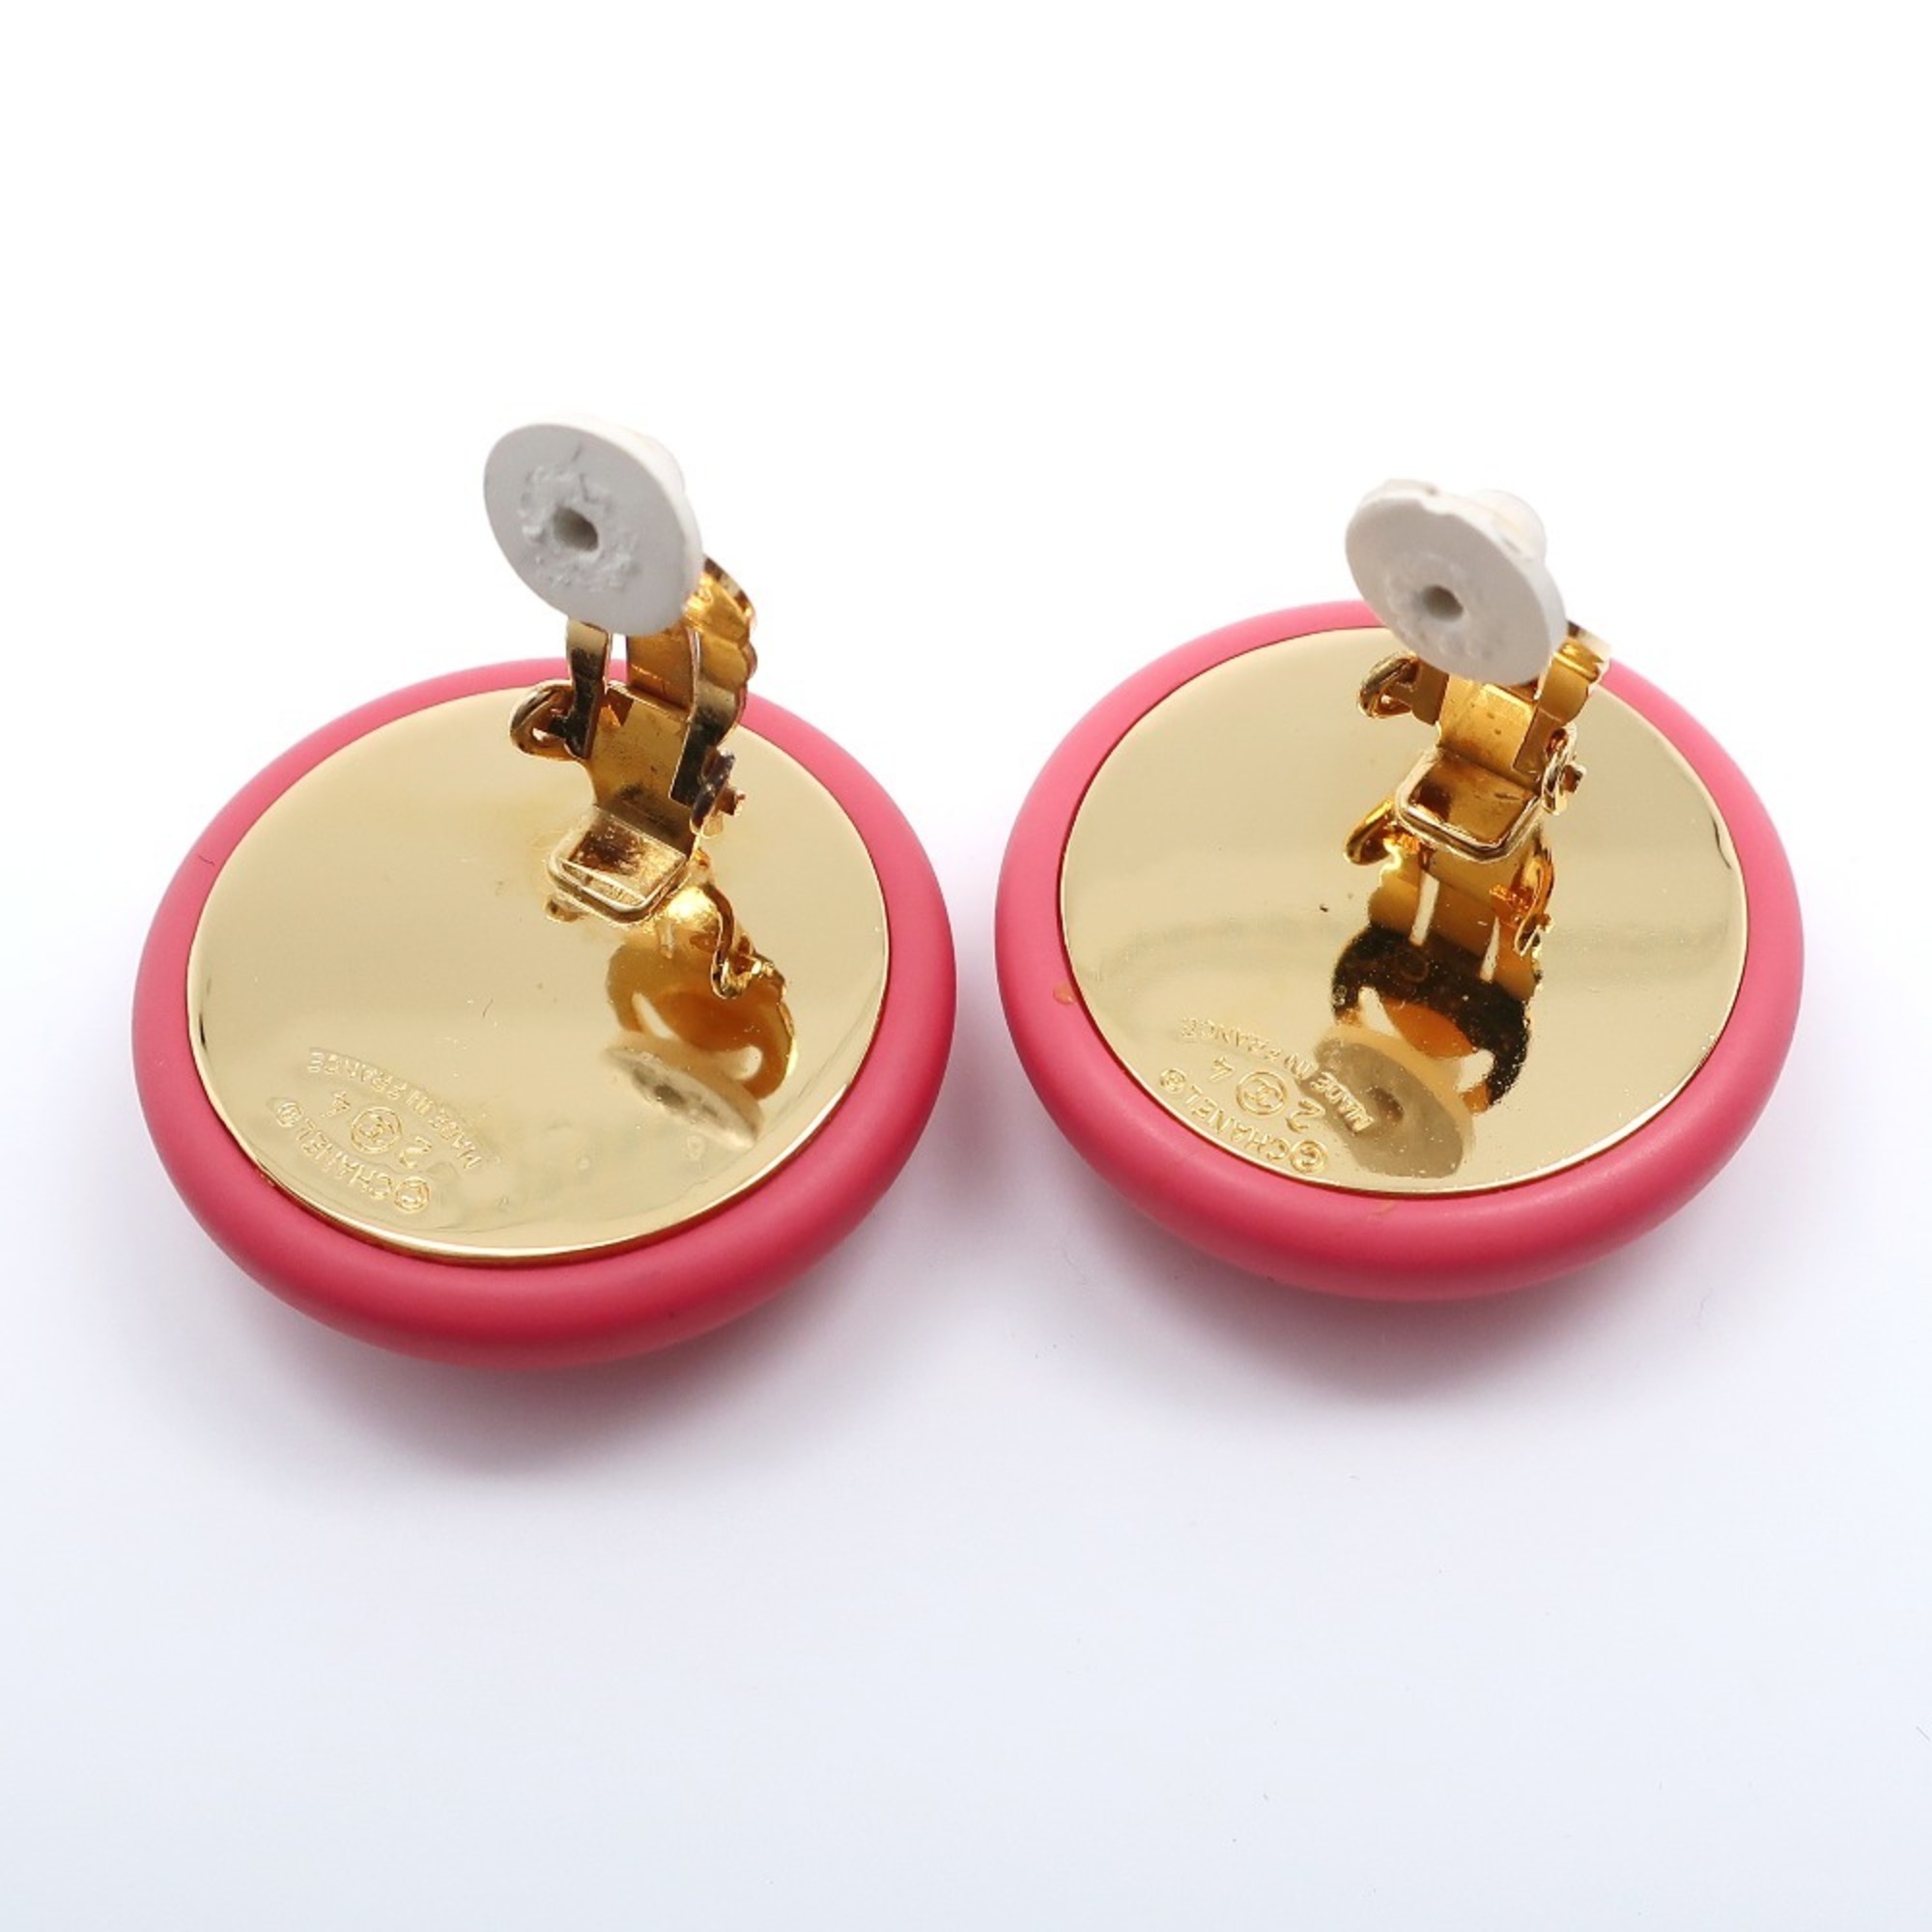 CHANEL Chanel here mark earrings vintage gold plated pink 24 ladies